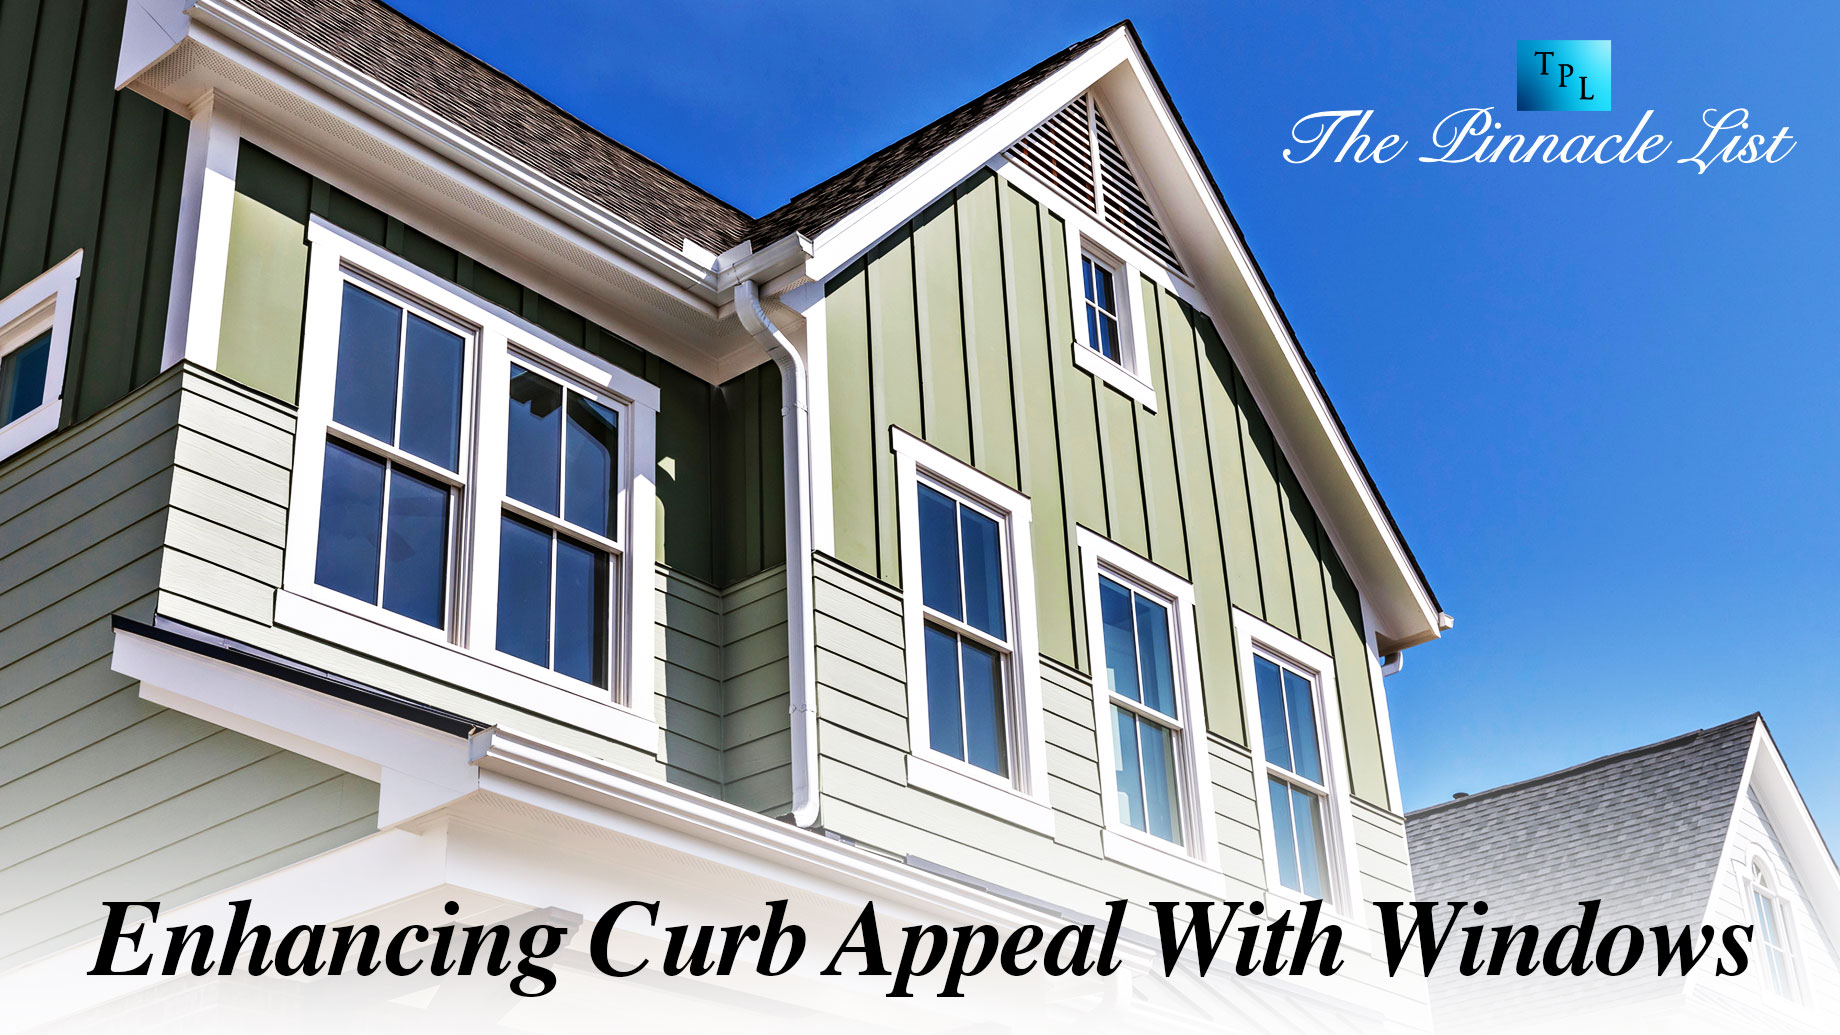 Enhancing Curb Appeal With Windows